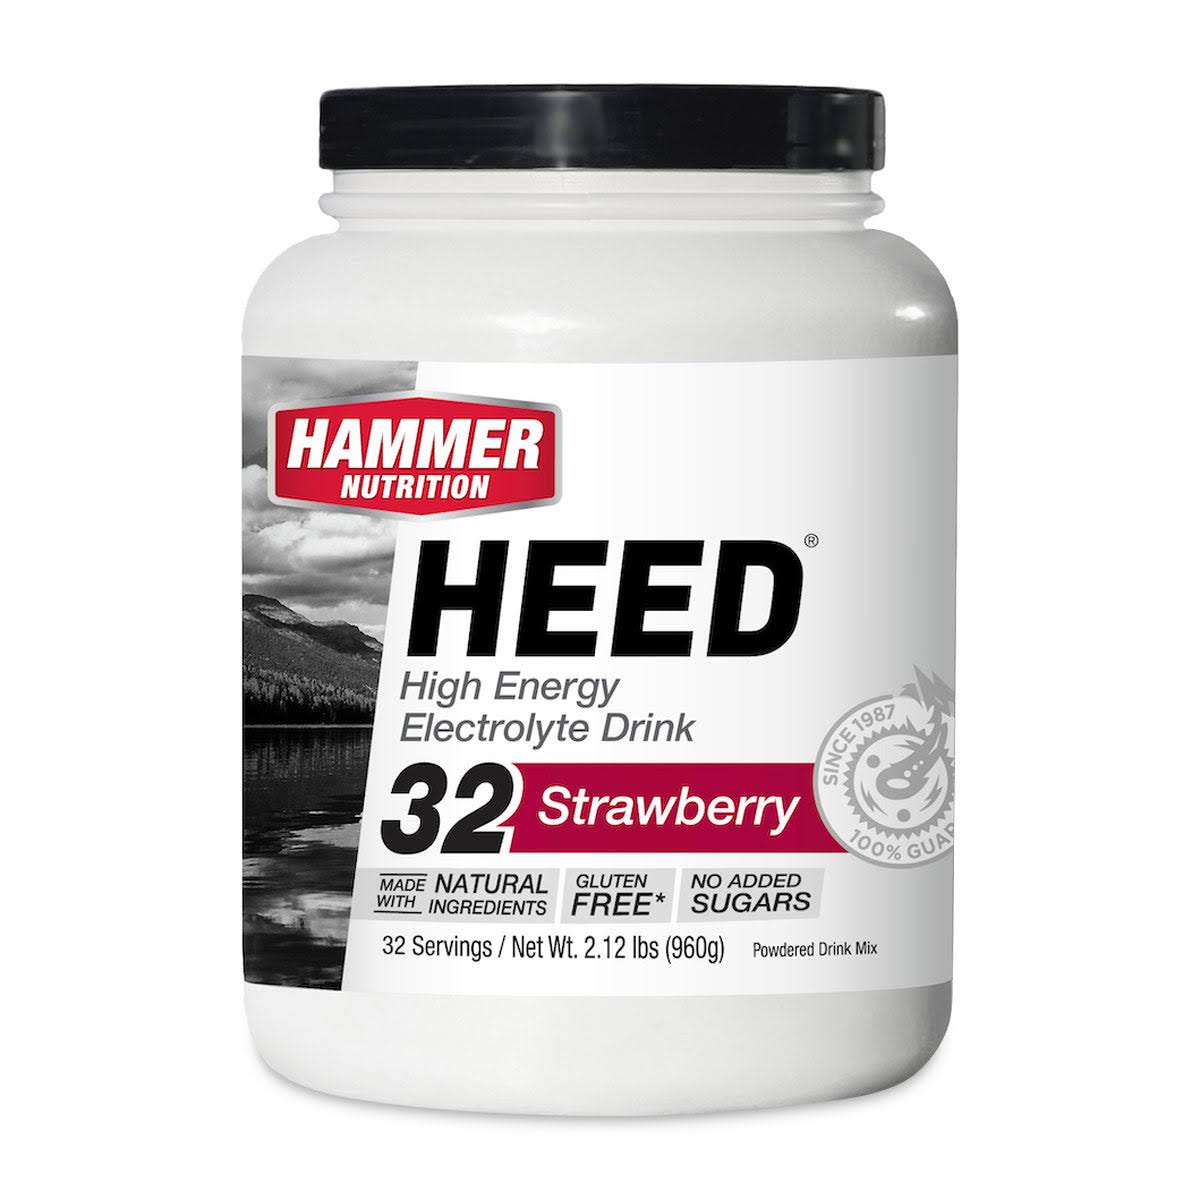 Hammer Nutrition HEED Sports Energy Drink - Strawberry, 32 Servings